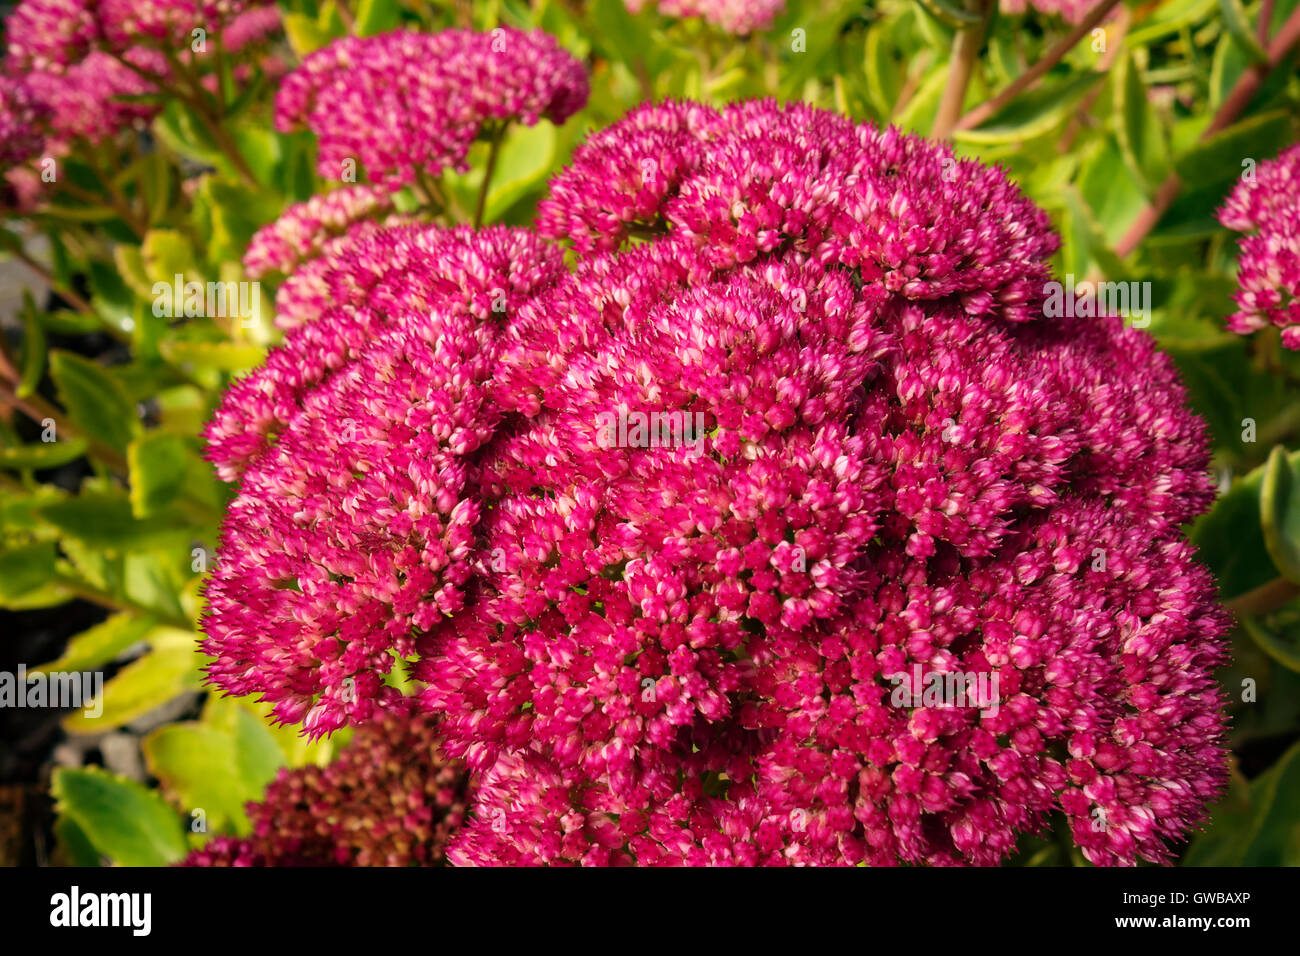 Close up of flowers of garden plant Hylotelephium spectabile. Previously known as Sedum spectabile. Stock Photo